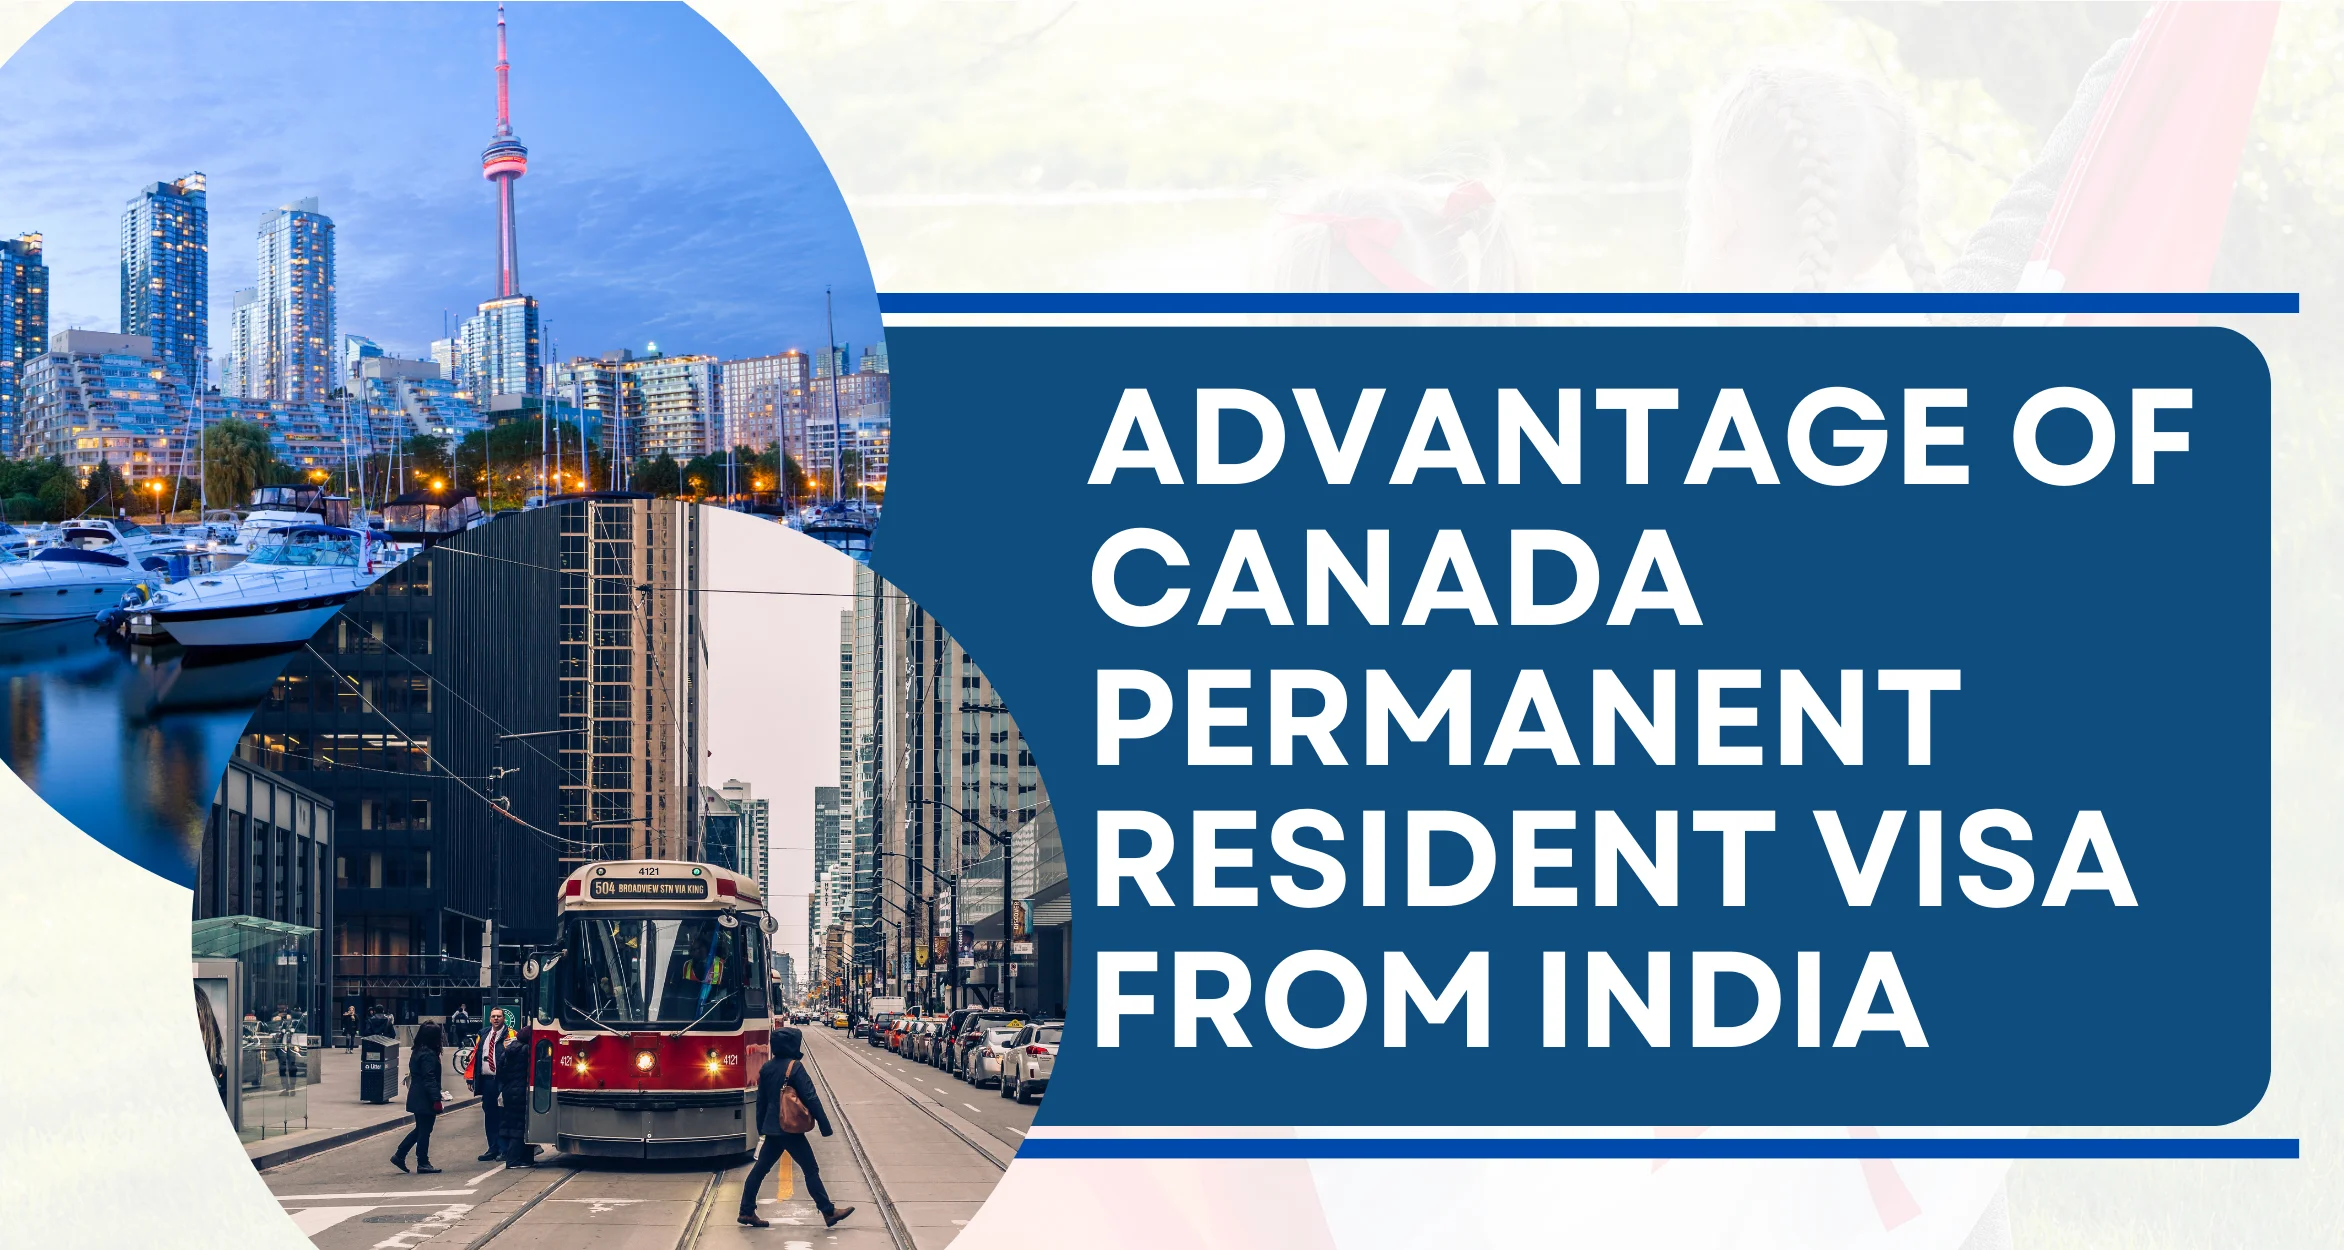 Advantage of Canada Permanent Resident visa from India